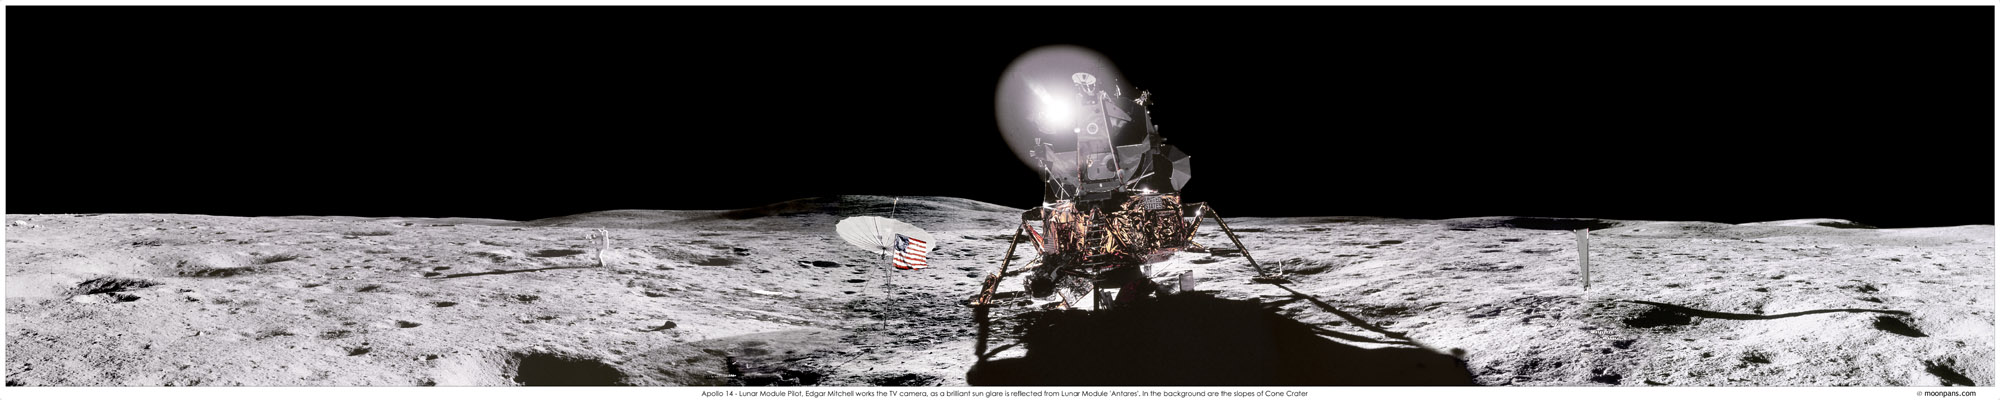 Apollo 14 LEM Panorama by Alan Shepard , Fra Mauro , The Moon